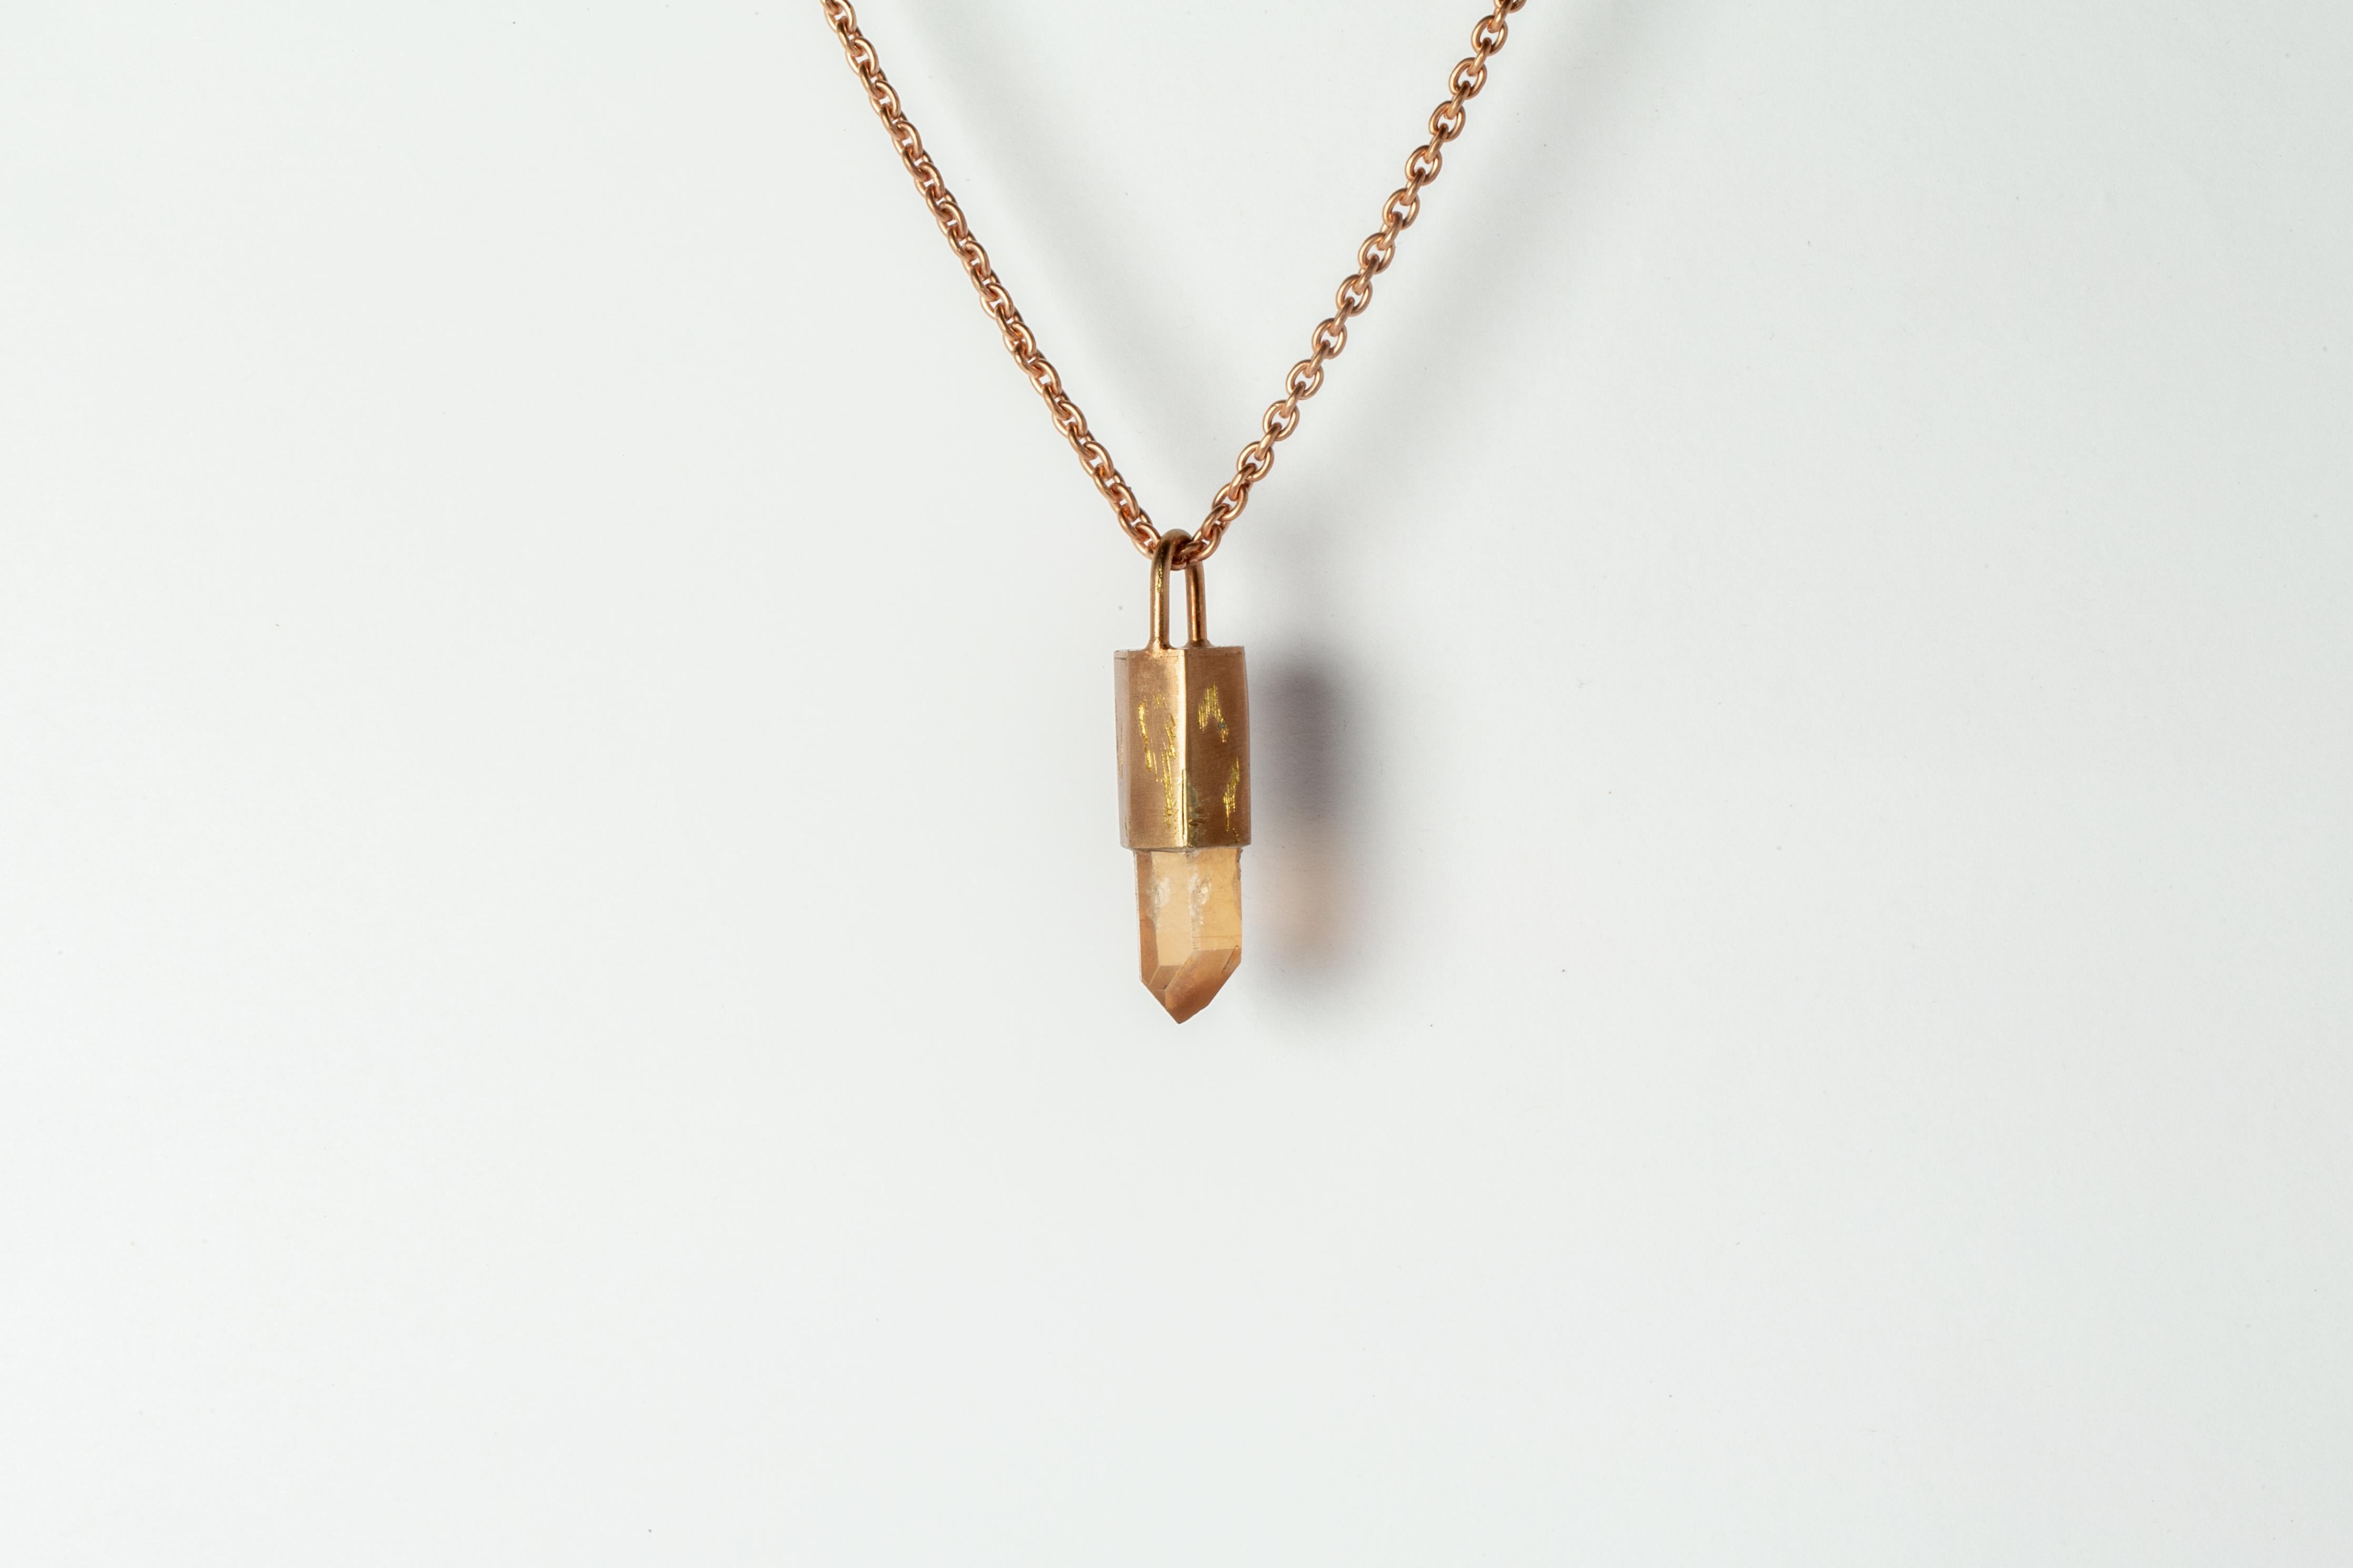 Pendant necklace in brass, sterling silver, and a rough of iron quartz. Brass and sterling silver substrates are electroplated with 18k Rose Gold and then dipped into acid to create the subtly destroyed surface. The Talisman series is an exploration